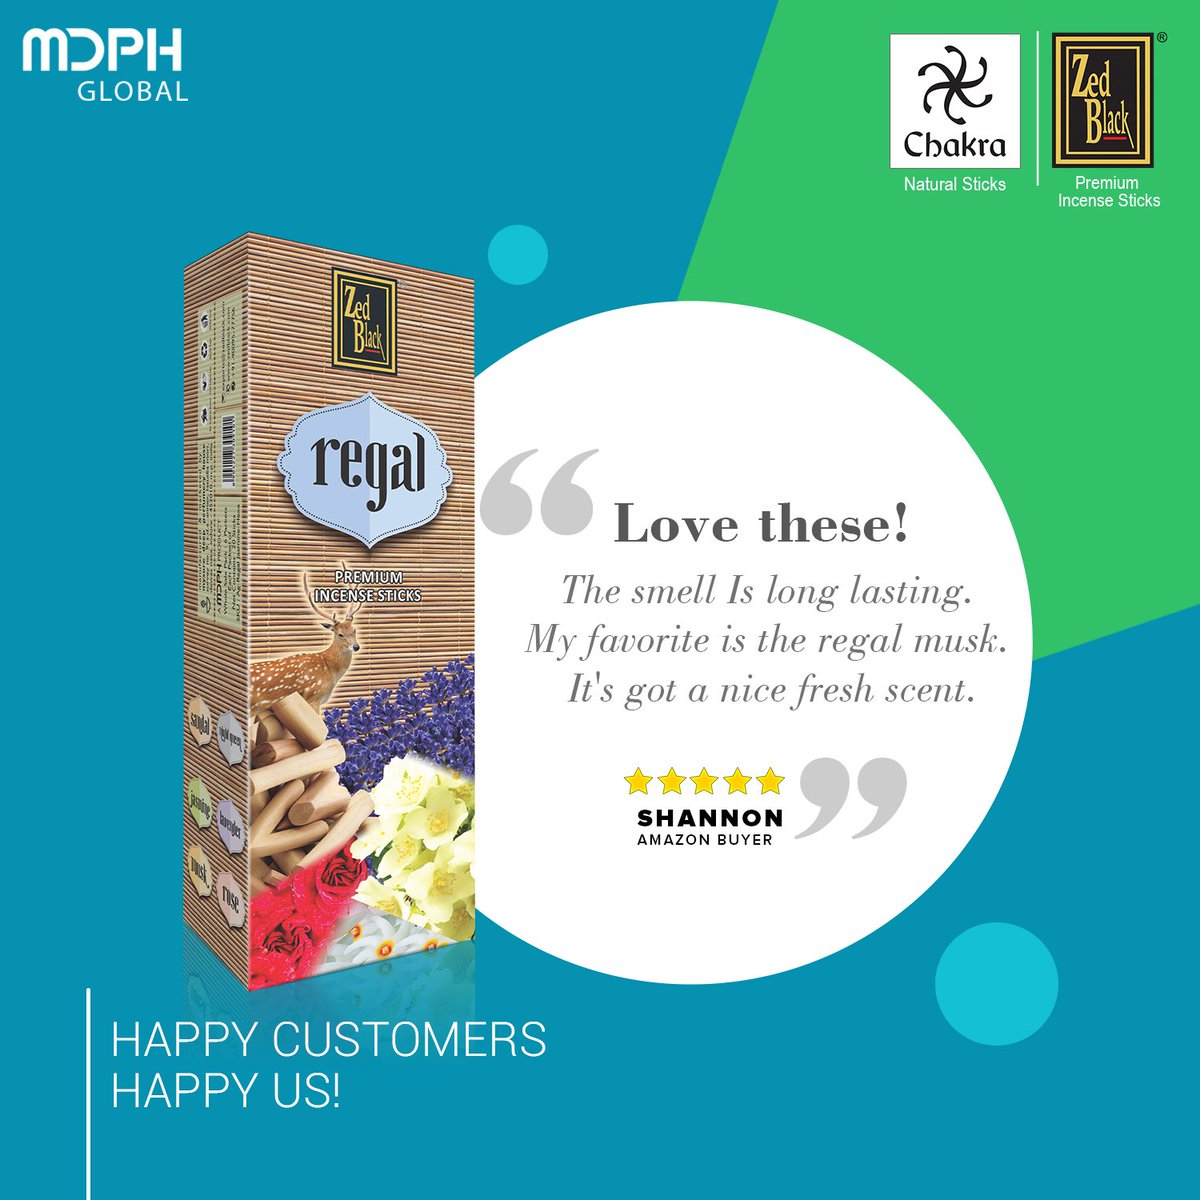 Happy customers, happy us! We are glad that you love it.
Shop now: amzn.to/35v8oyj

#MDPHGlobal #ZedBlack #ChakraAroma #MDPH #aroma #chakra #Incense #natural #customer #happy #inspiration #reviews #fragrances #SaturdayThoughts #love #Amazon #onlineshopping #herbal